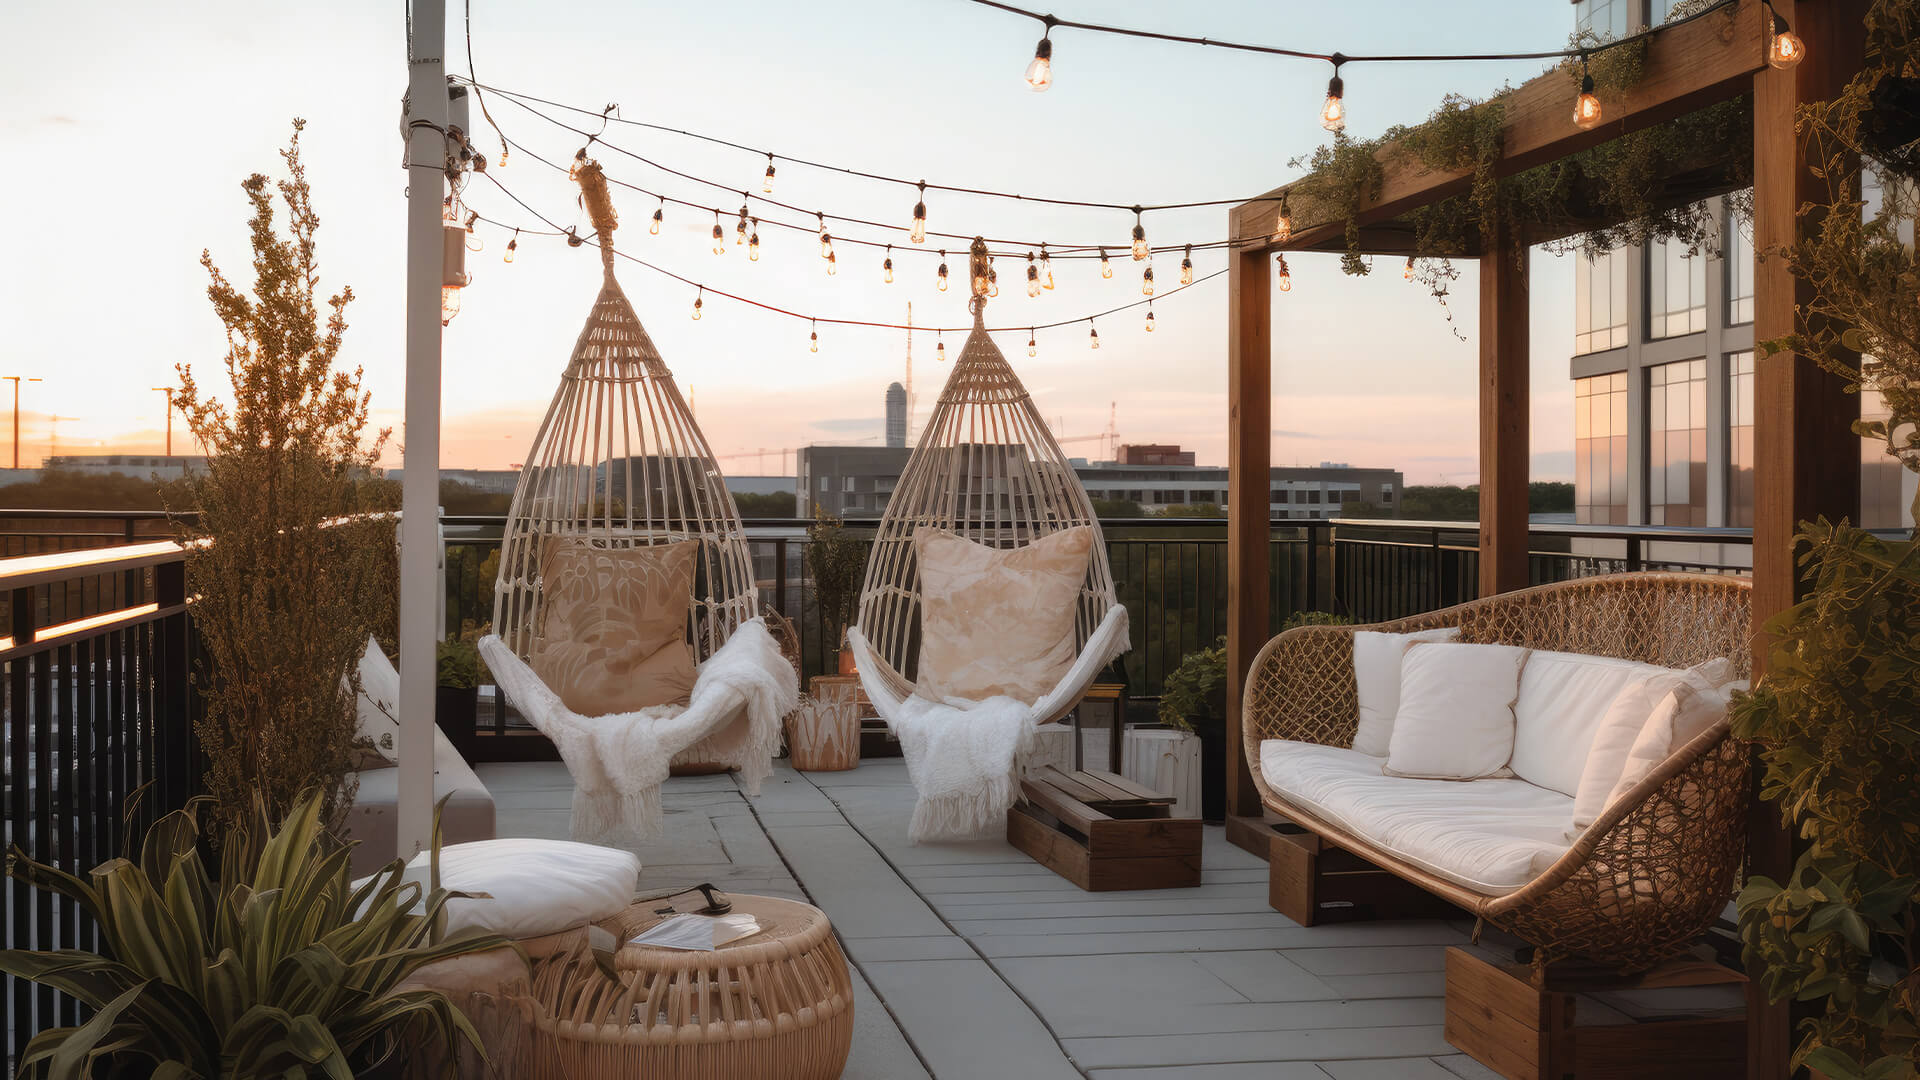 a modern of a comfortable rooftop patio area with a lounging area, a hanging chair, and string lights at sunset